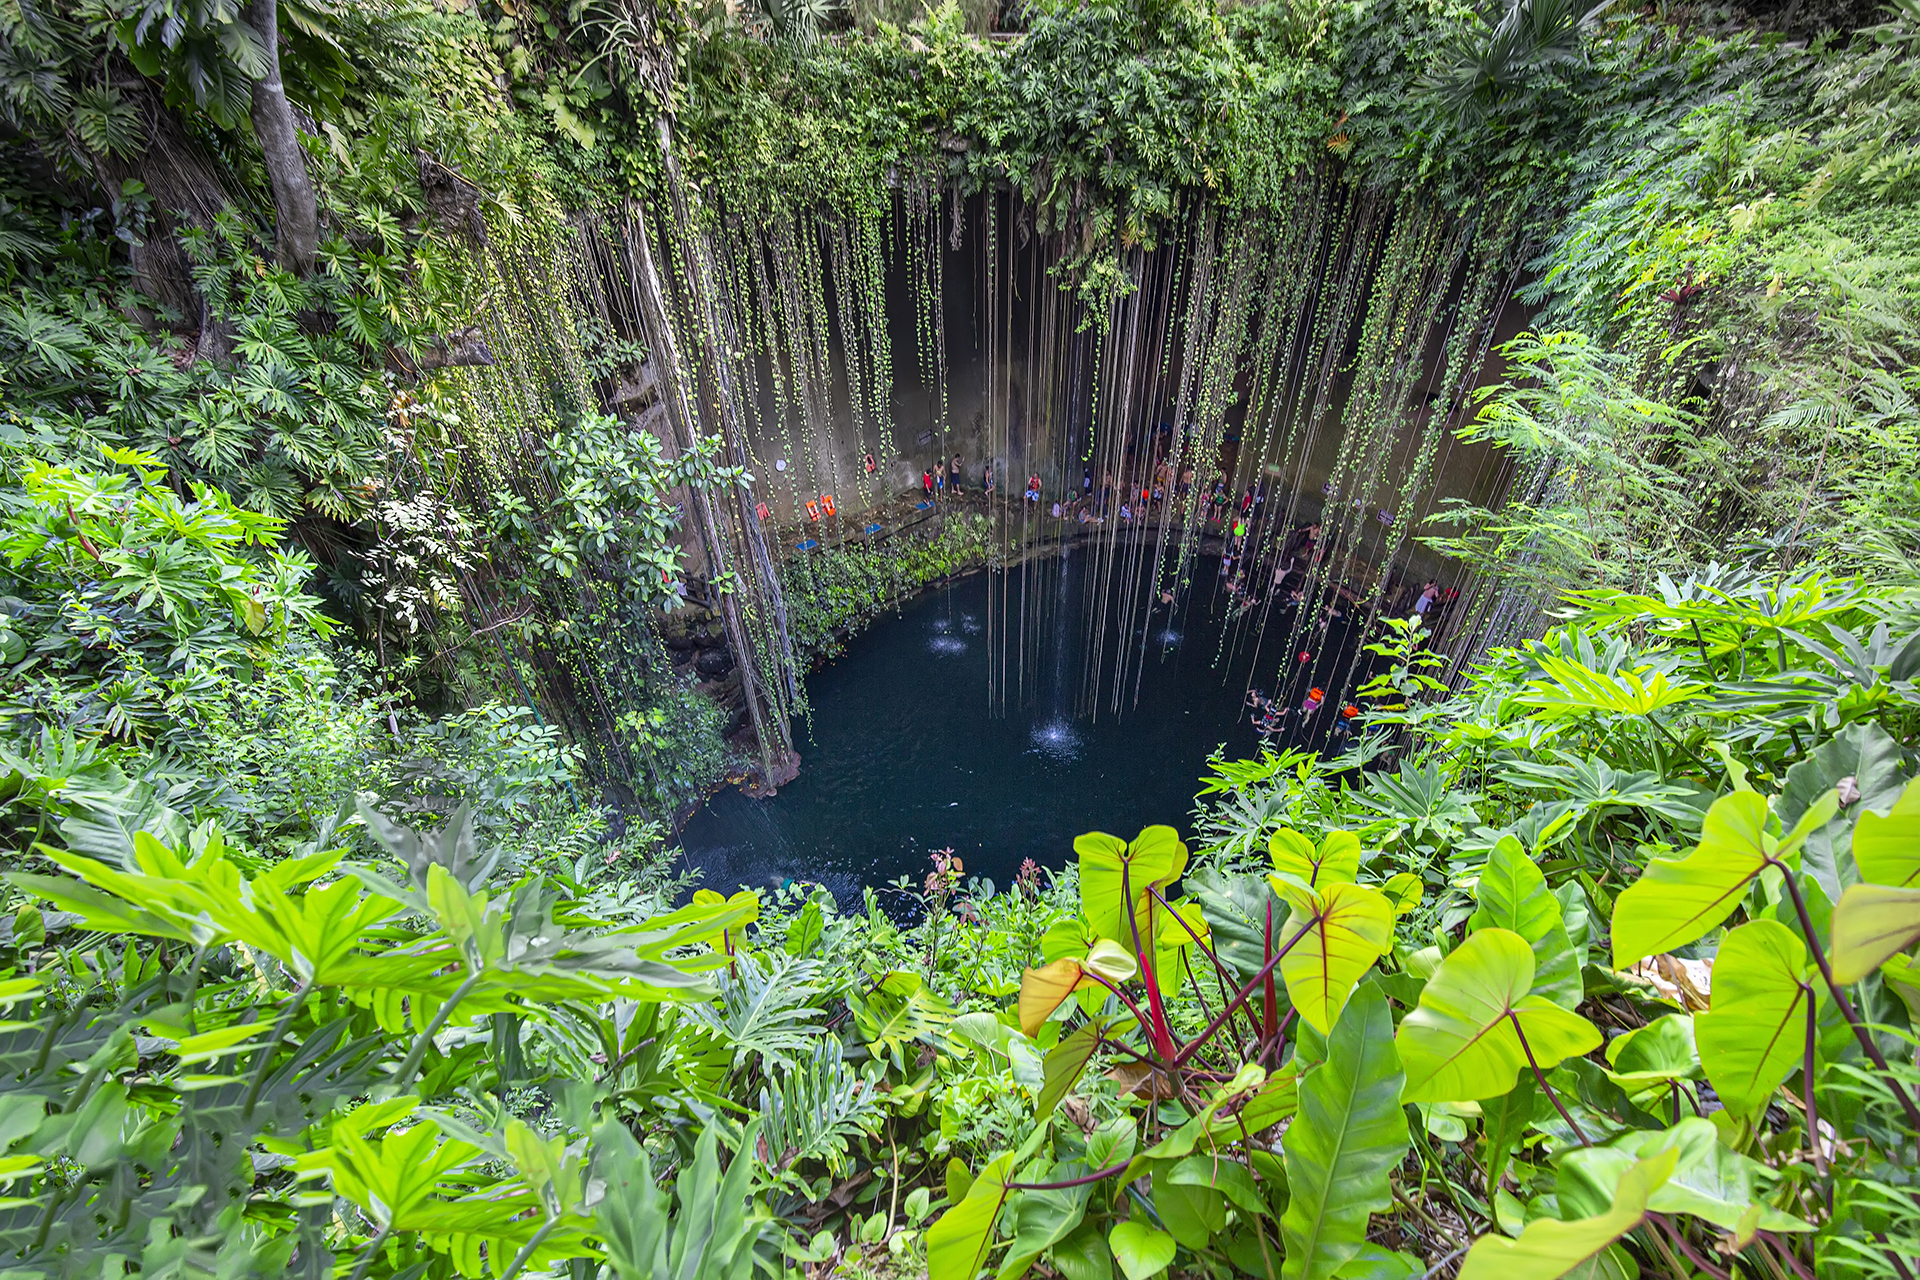 Ik Kil, Mexico - 20 December, 2019: Ik Kil Cenote located in the northern center of the Yucatán Peninsula, a part of the Ik Kil Archeological Park near Chichen Itza